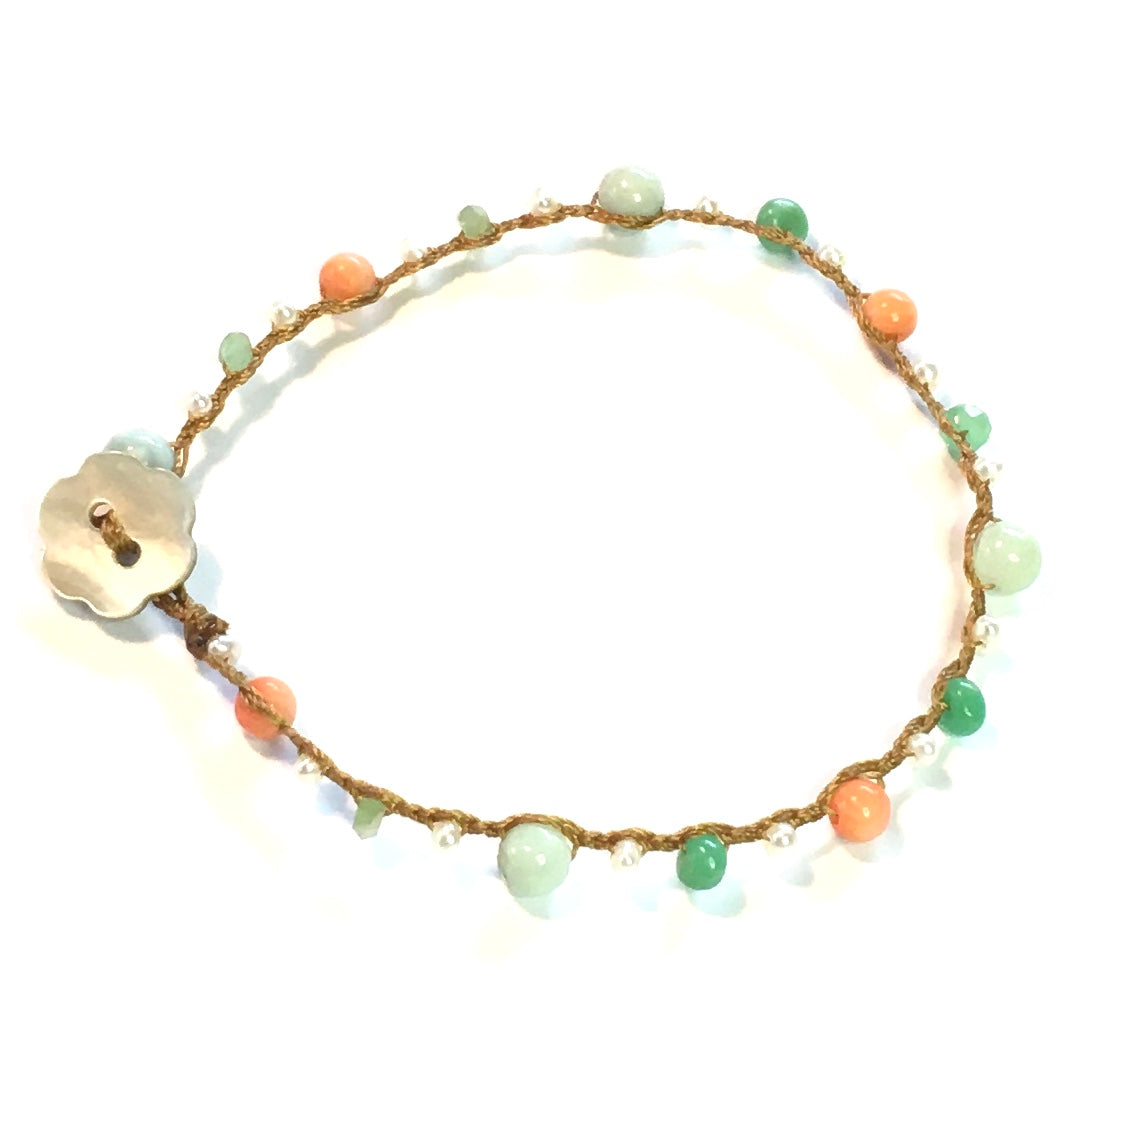 Coral, Chrysoprase, Pearls and Amazonite Bracelet